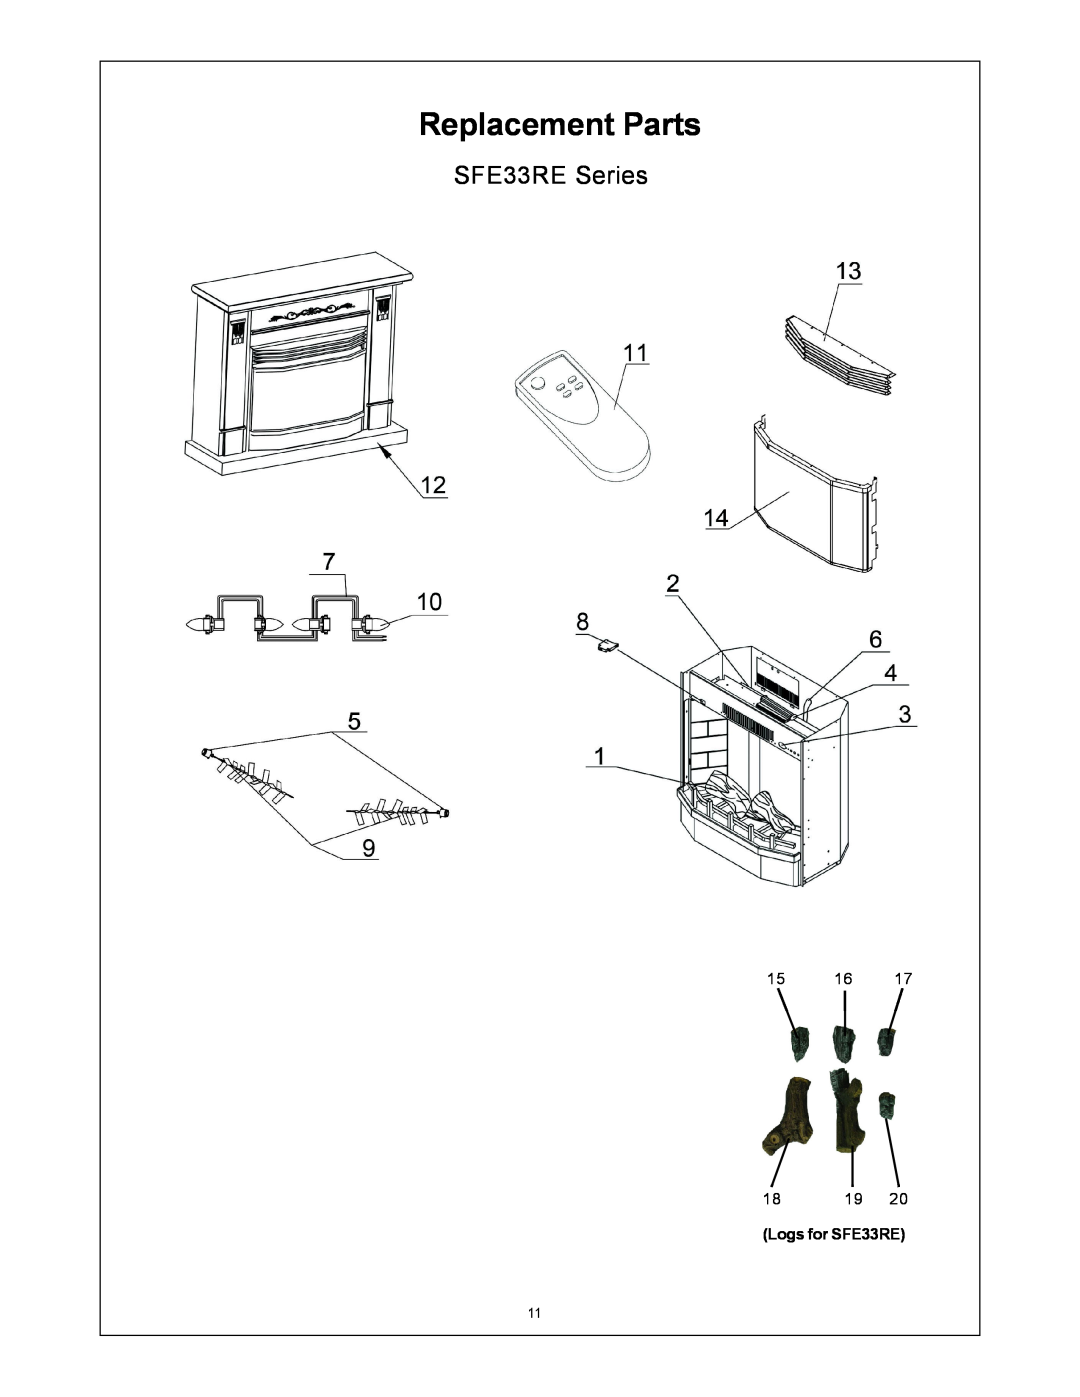 Procom SFE23RE installation instructions SFE33RE Series, Replacement Parts, Logs for SFE33RE 